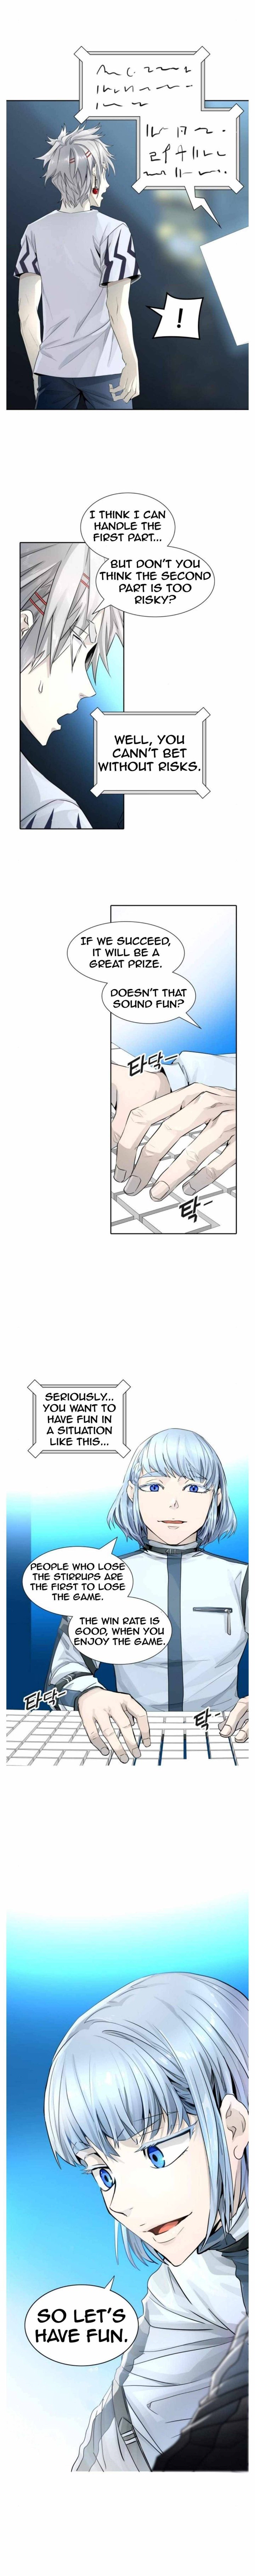 Tower Of God 501 3